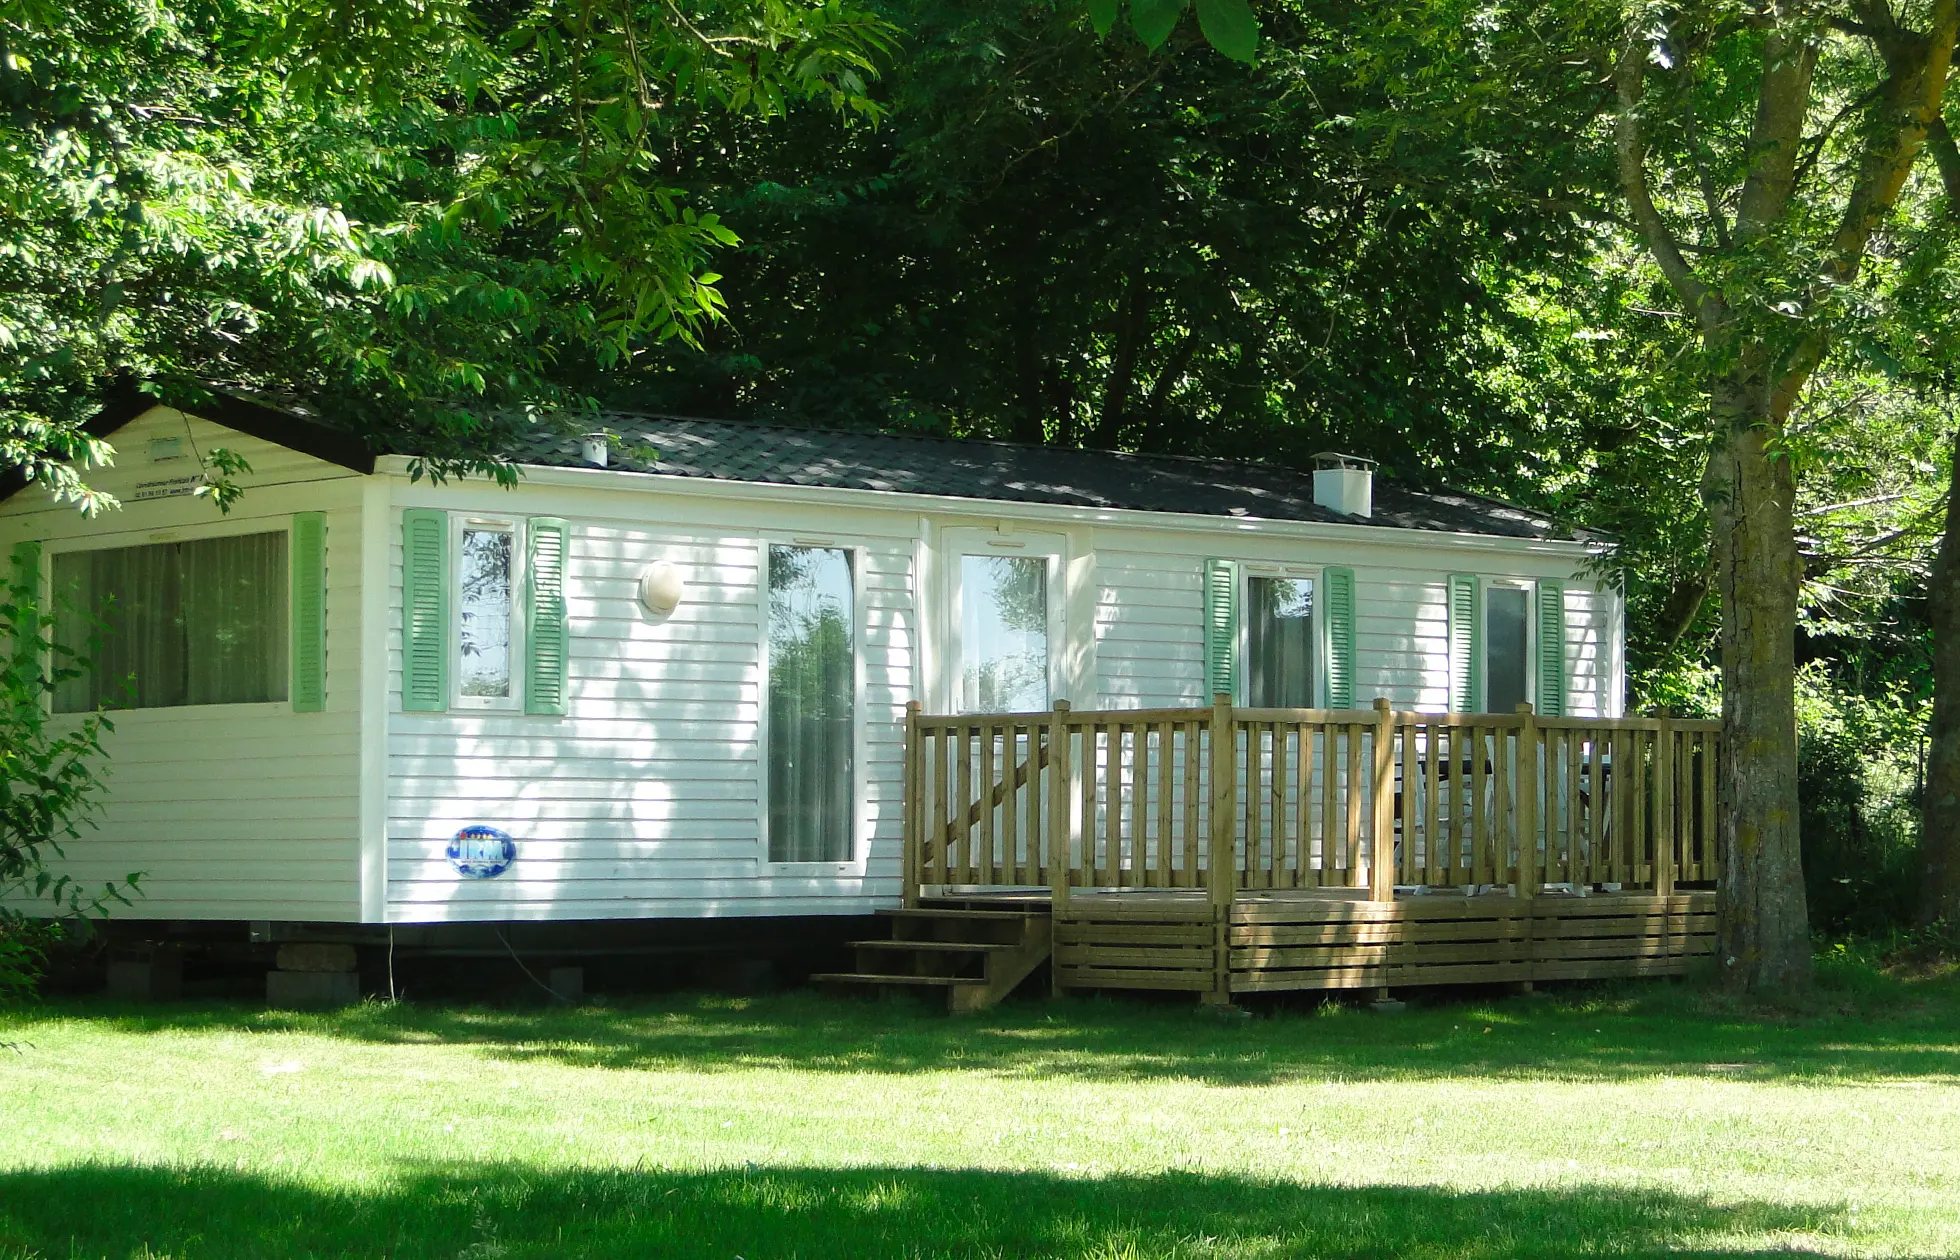 offer ' - '25 - Camping Le Rompval - Hébergement